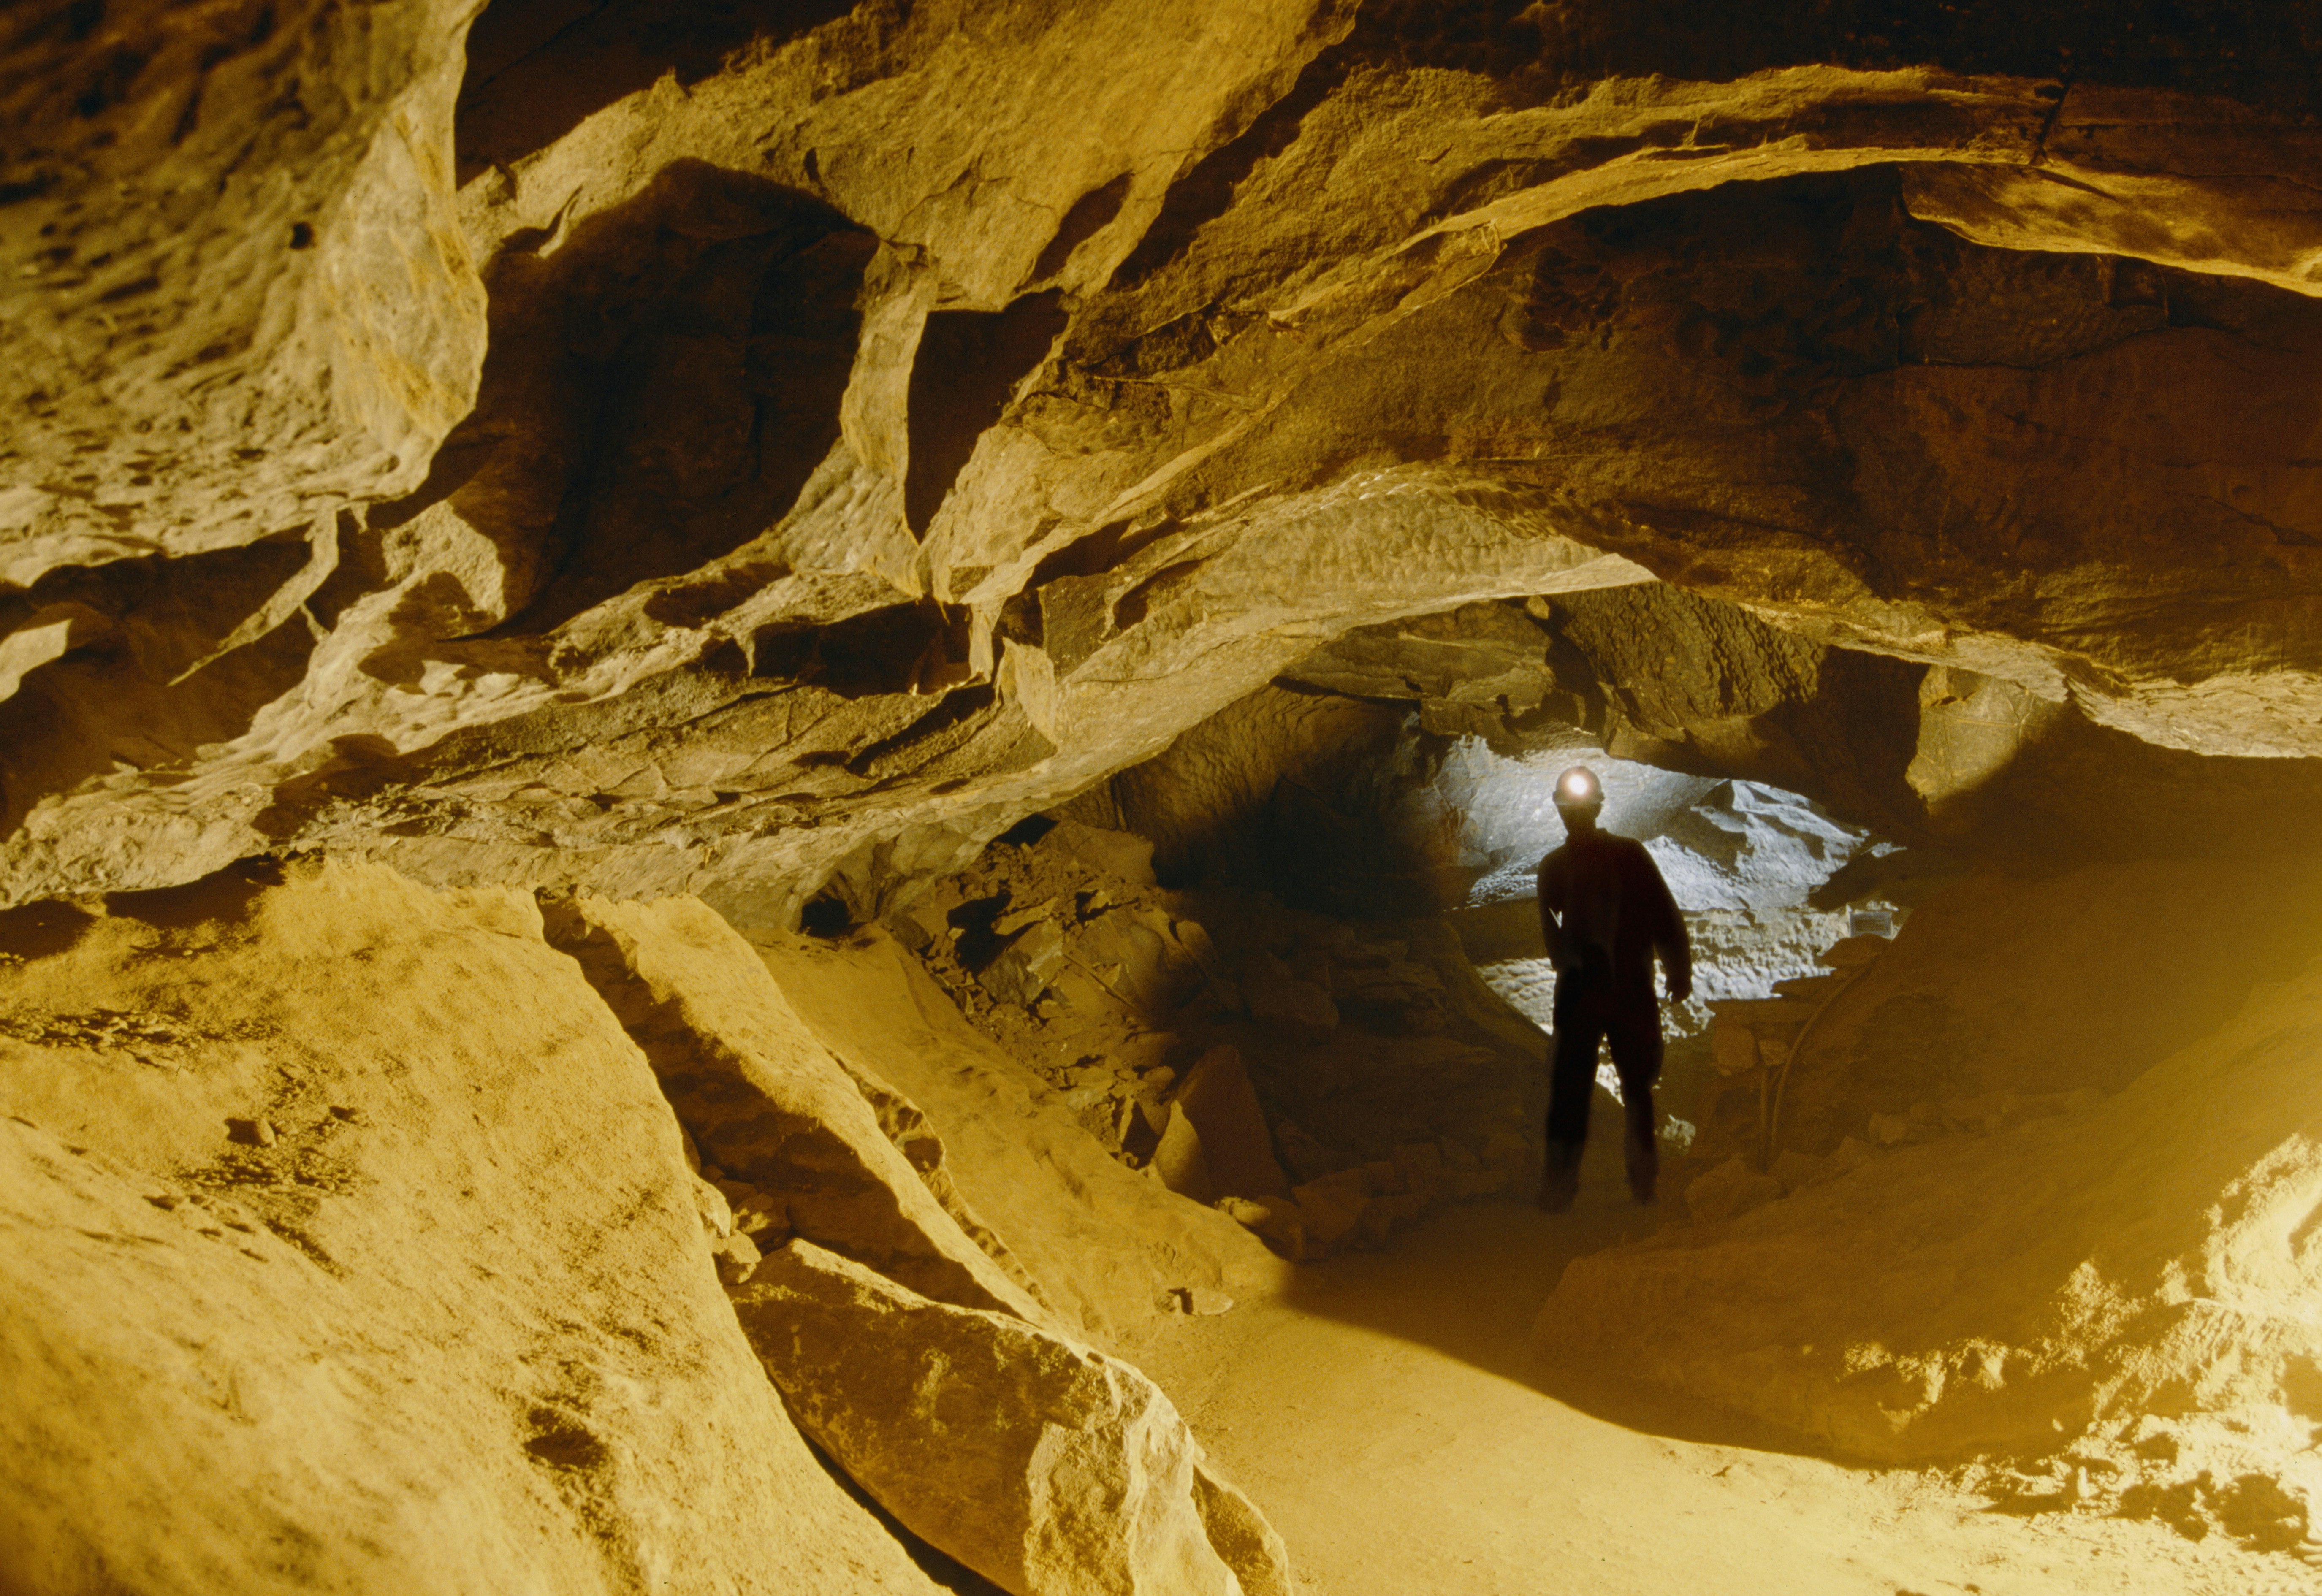 The silhouette of a man wearing a head torch can be seen walking through a narrow passageway in a cave system. The cave walls are a sandy-yellow color.